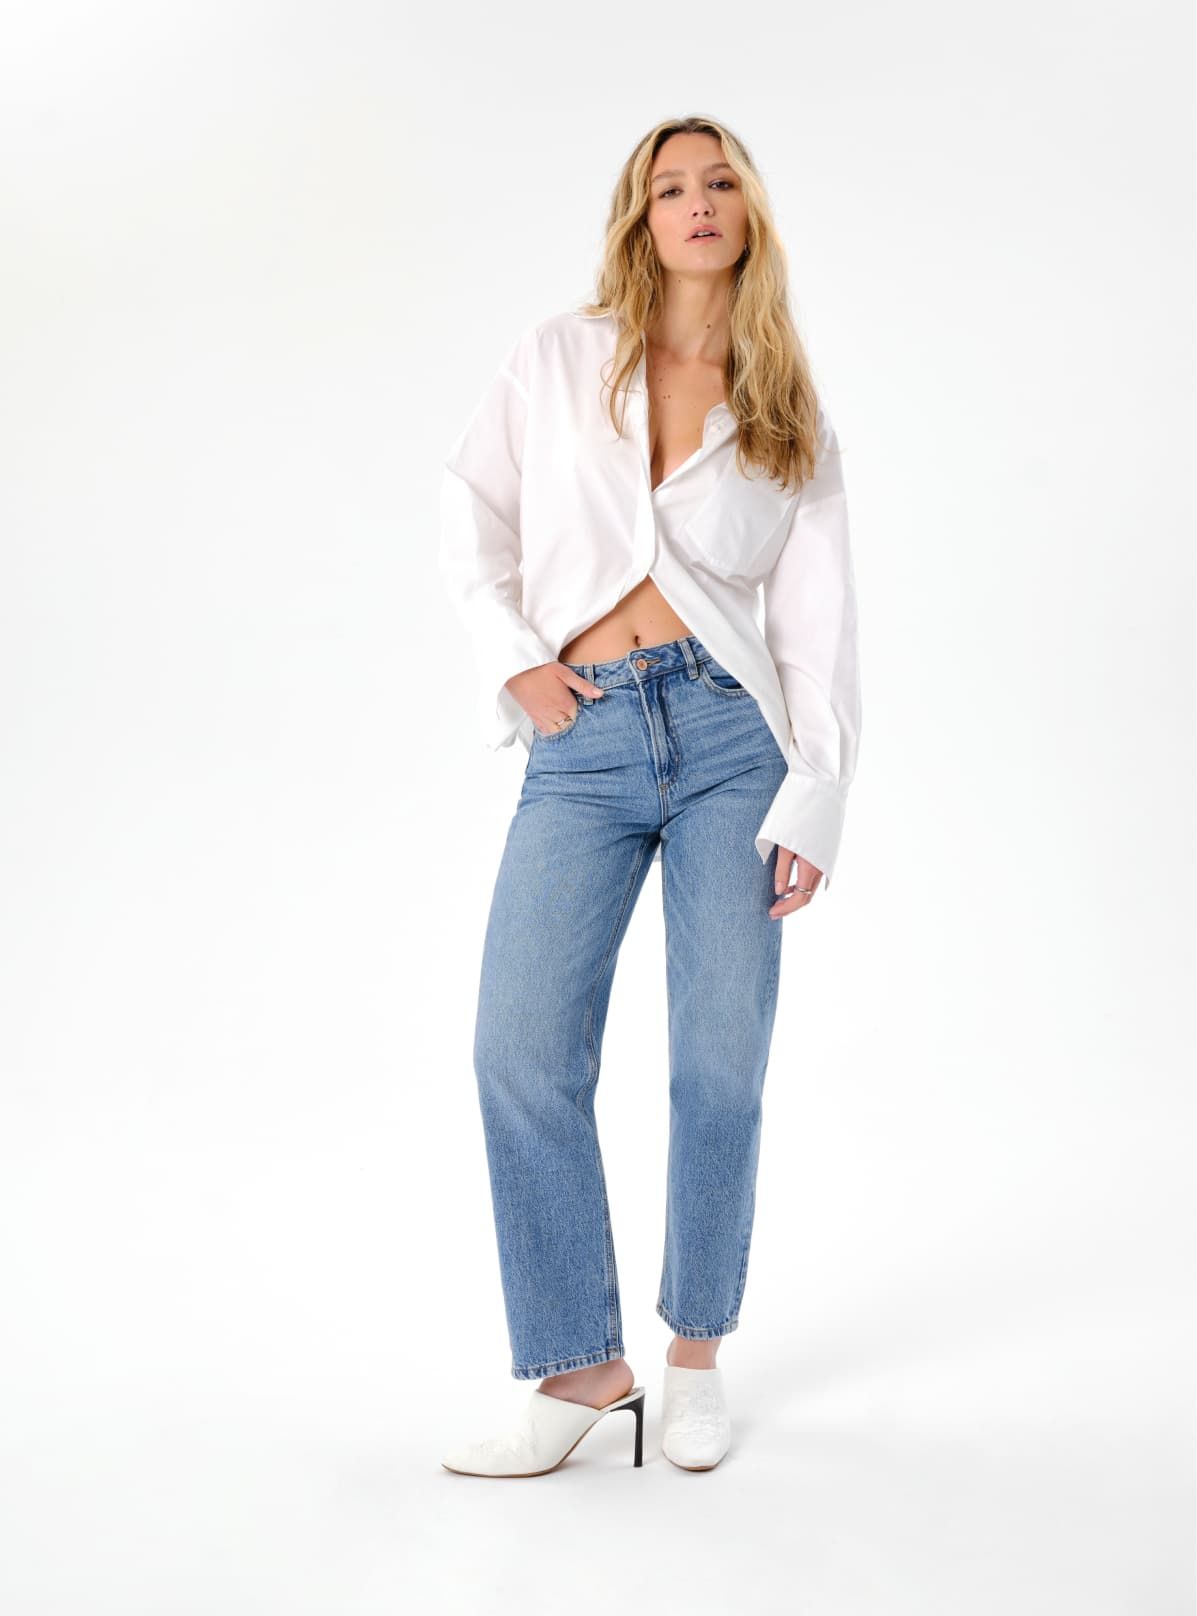 A model wears blue straight leg jeans with a white button down shirt.